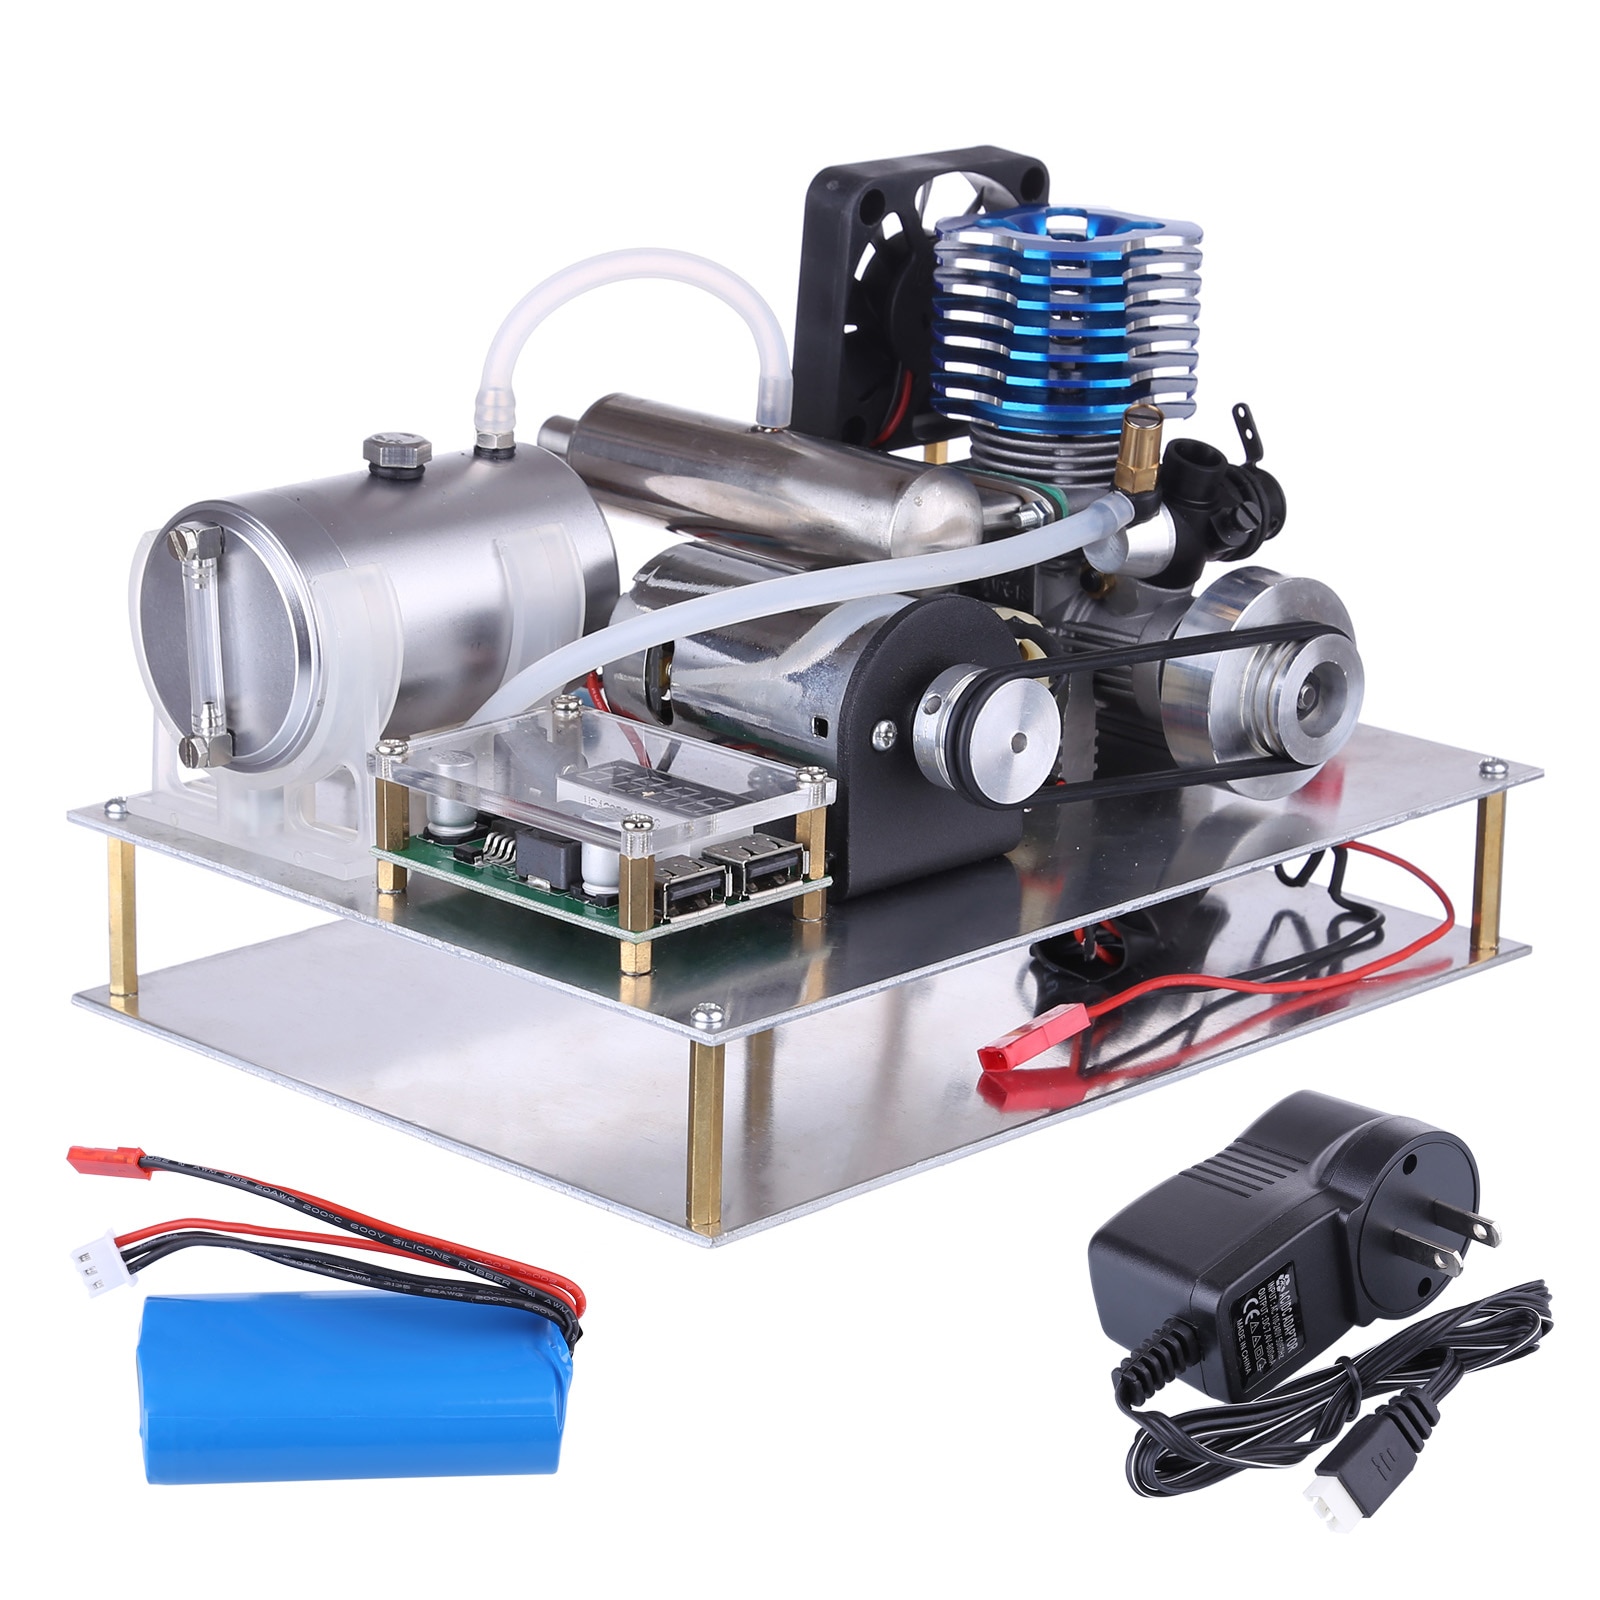 VX 18 Single Cylinder 2-stroke Air-cooled Assembled Methanol Engine Generator Model with Voltage Digital Display and Dual USB 3